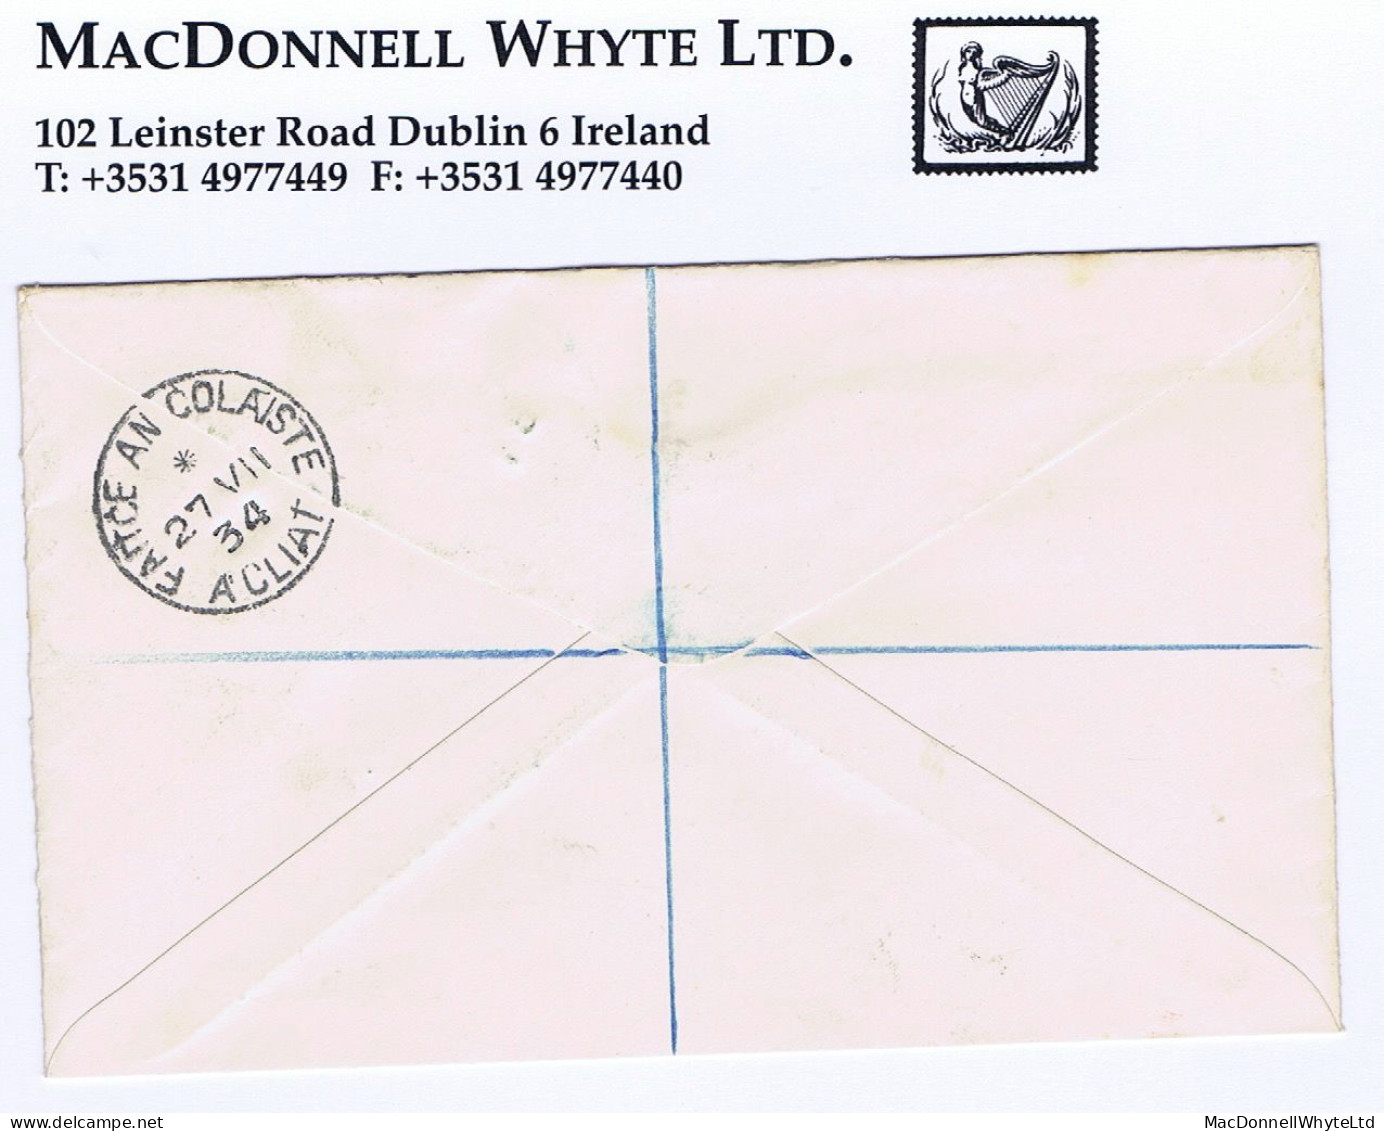 Ireland 1934 GAA 2d Hurler Pair On First Day Cover With 1d Map, Registered M F O'Donnell - FDC